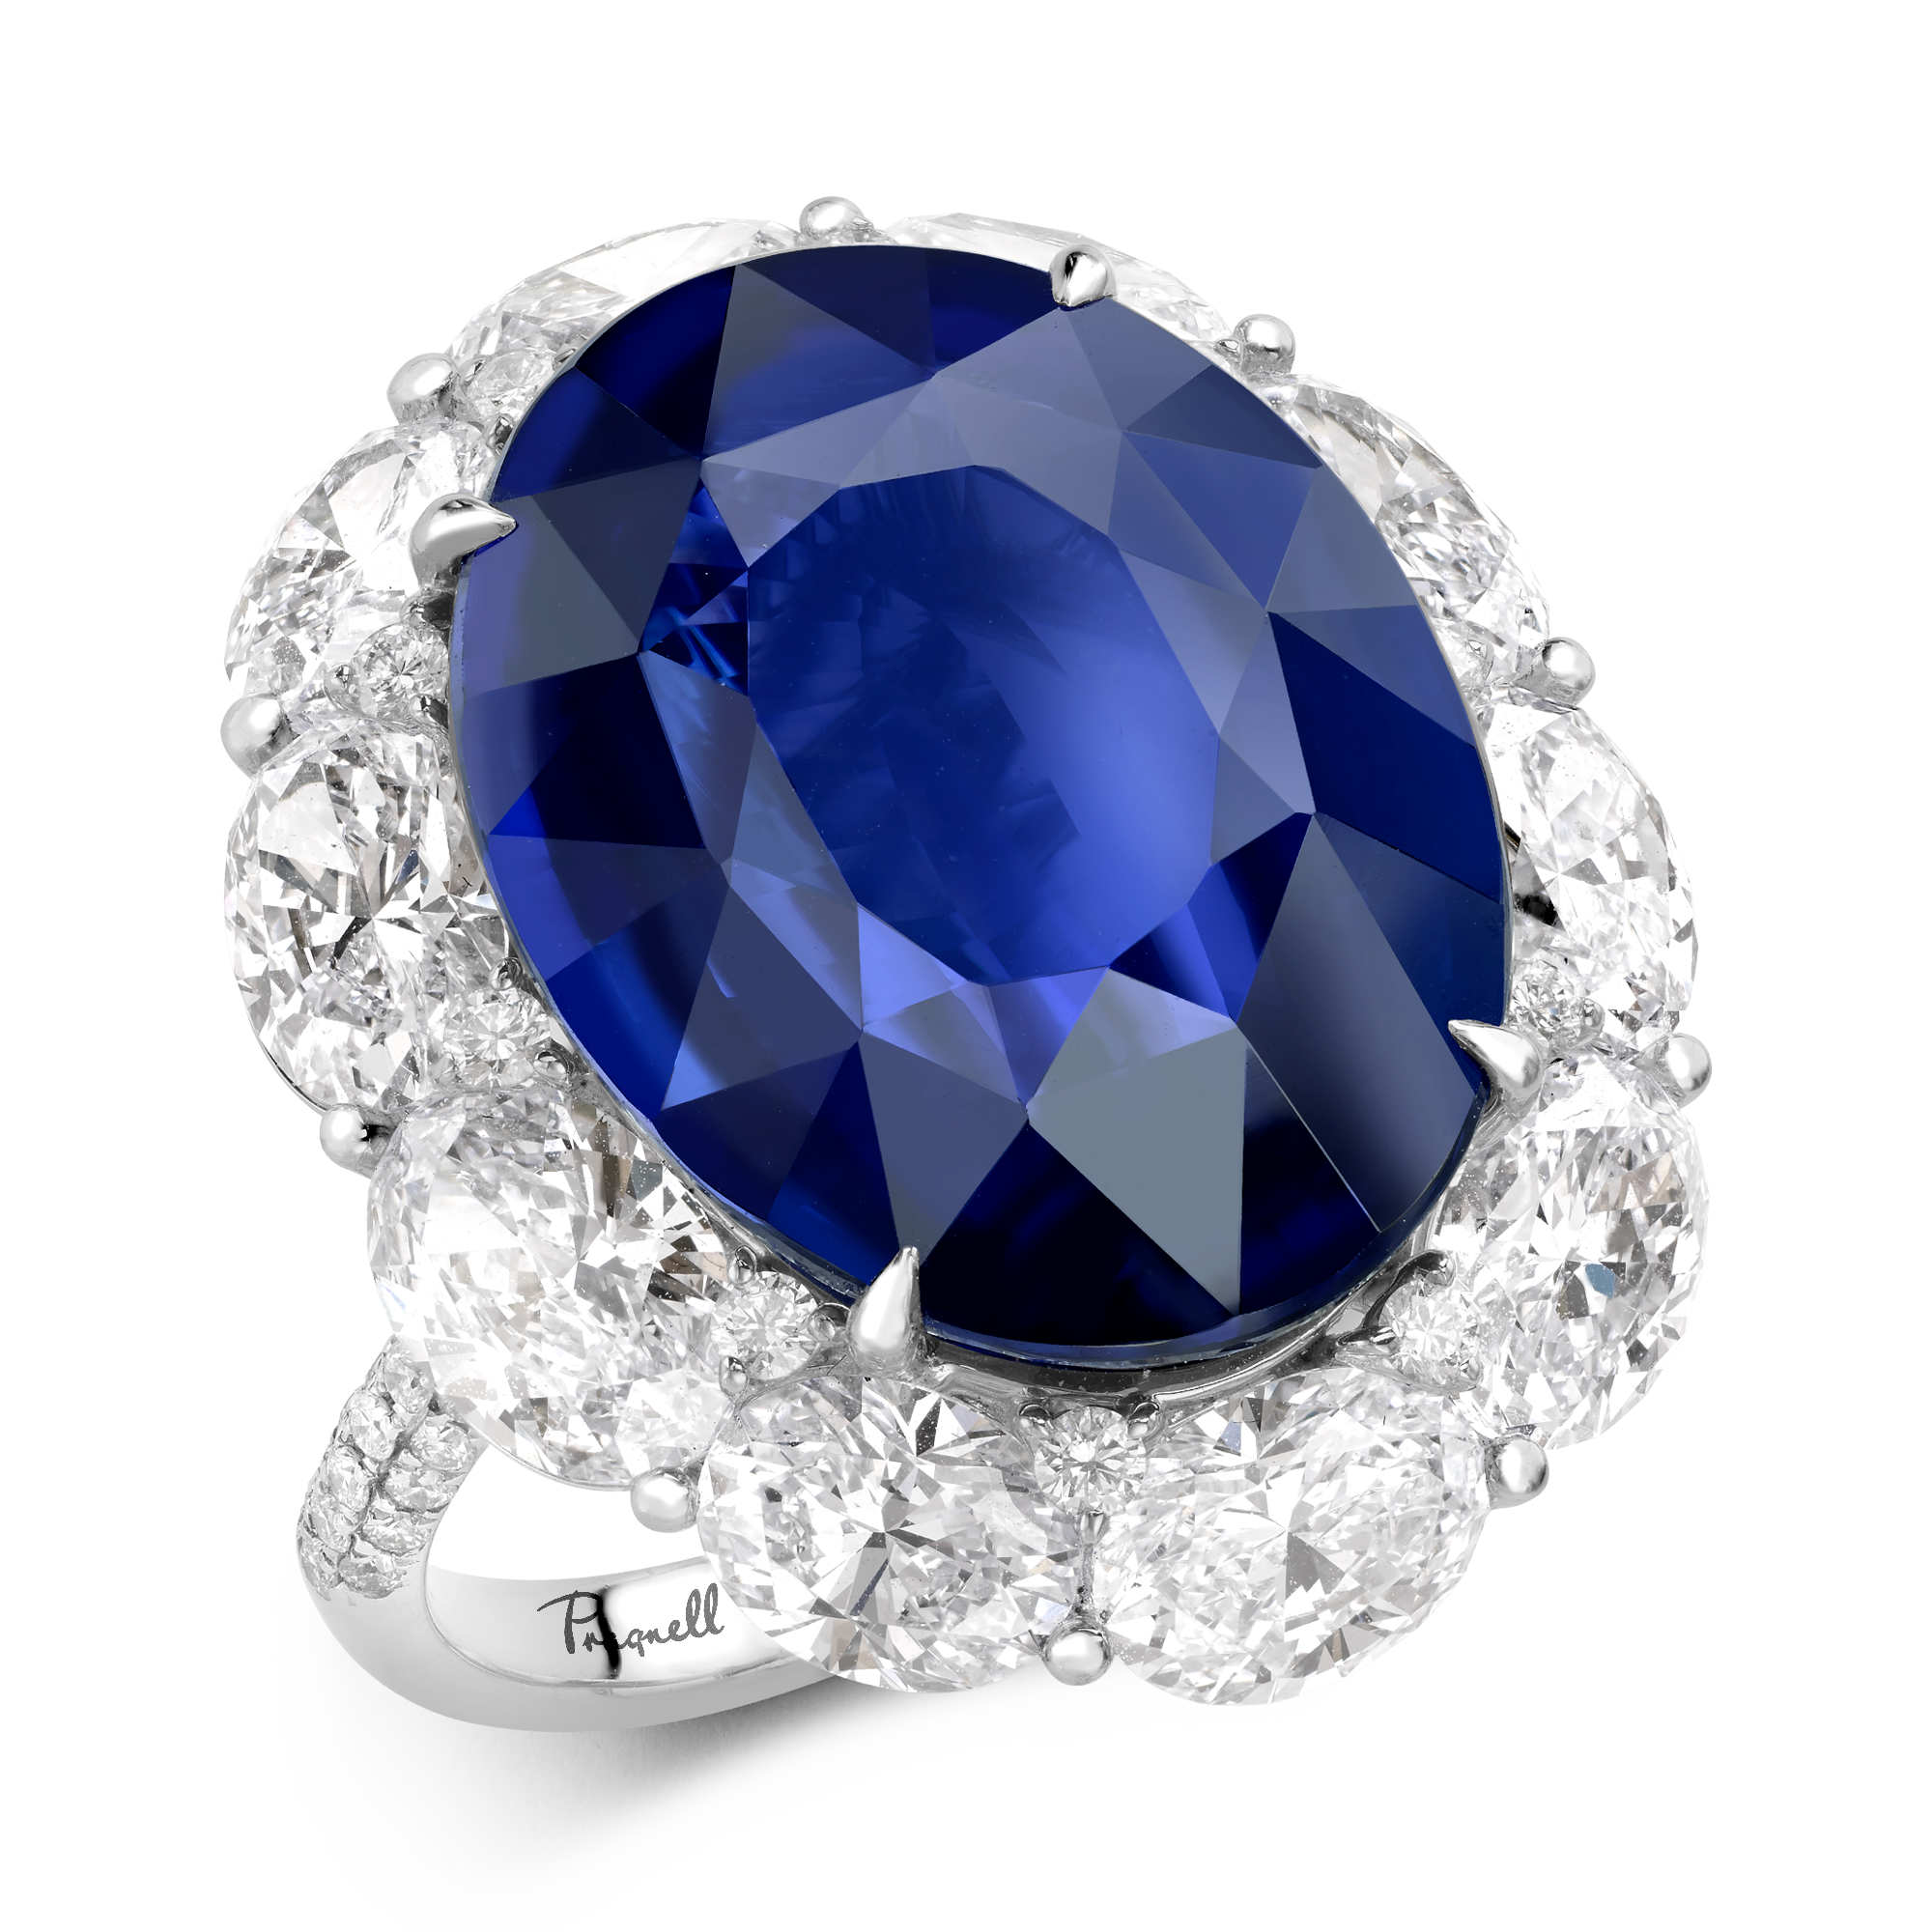 Masterpiece 21.46ct Sri Lankan Sapphire and Diamond Cluster Ring Oval Cut, Claw Set_1